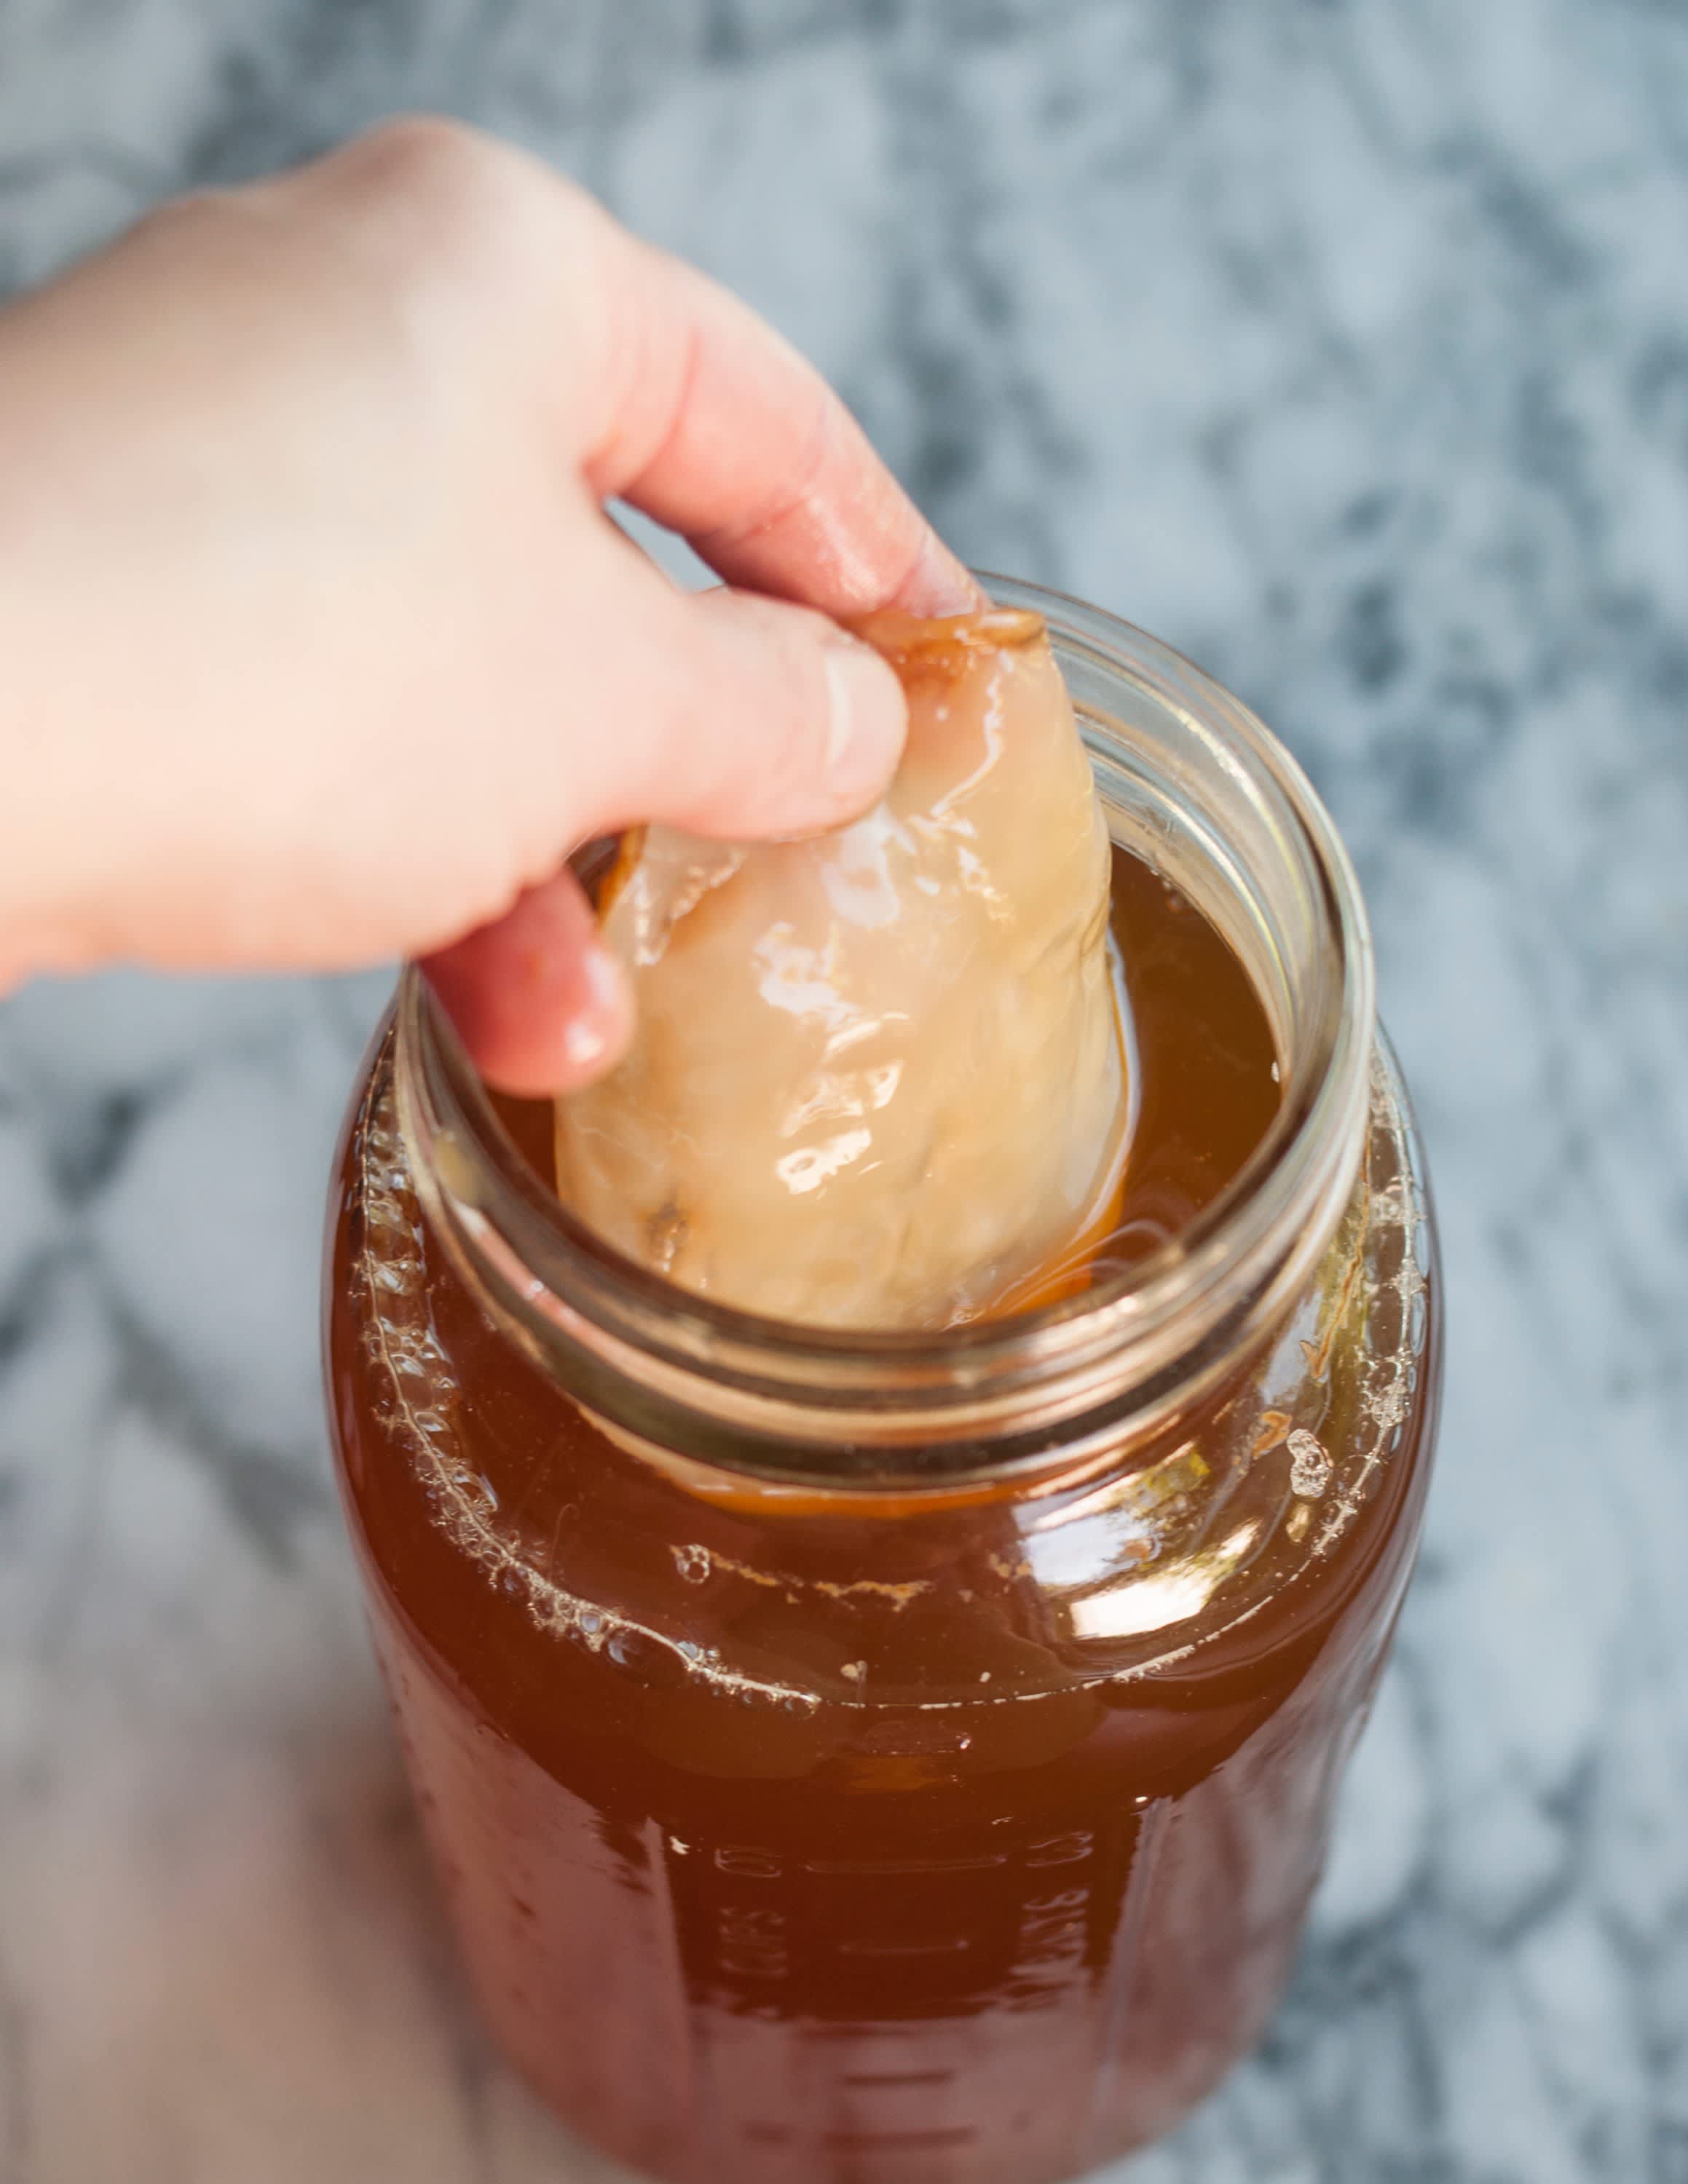 Is my SCOBY suppose to do that? – YEABUCHA